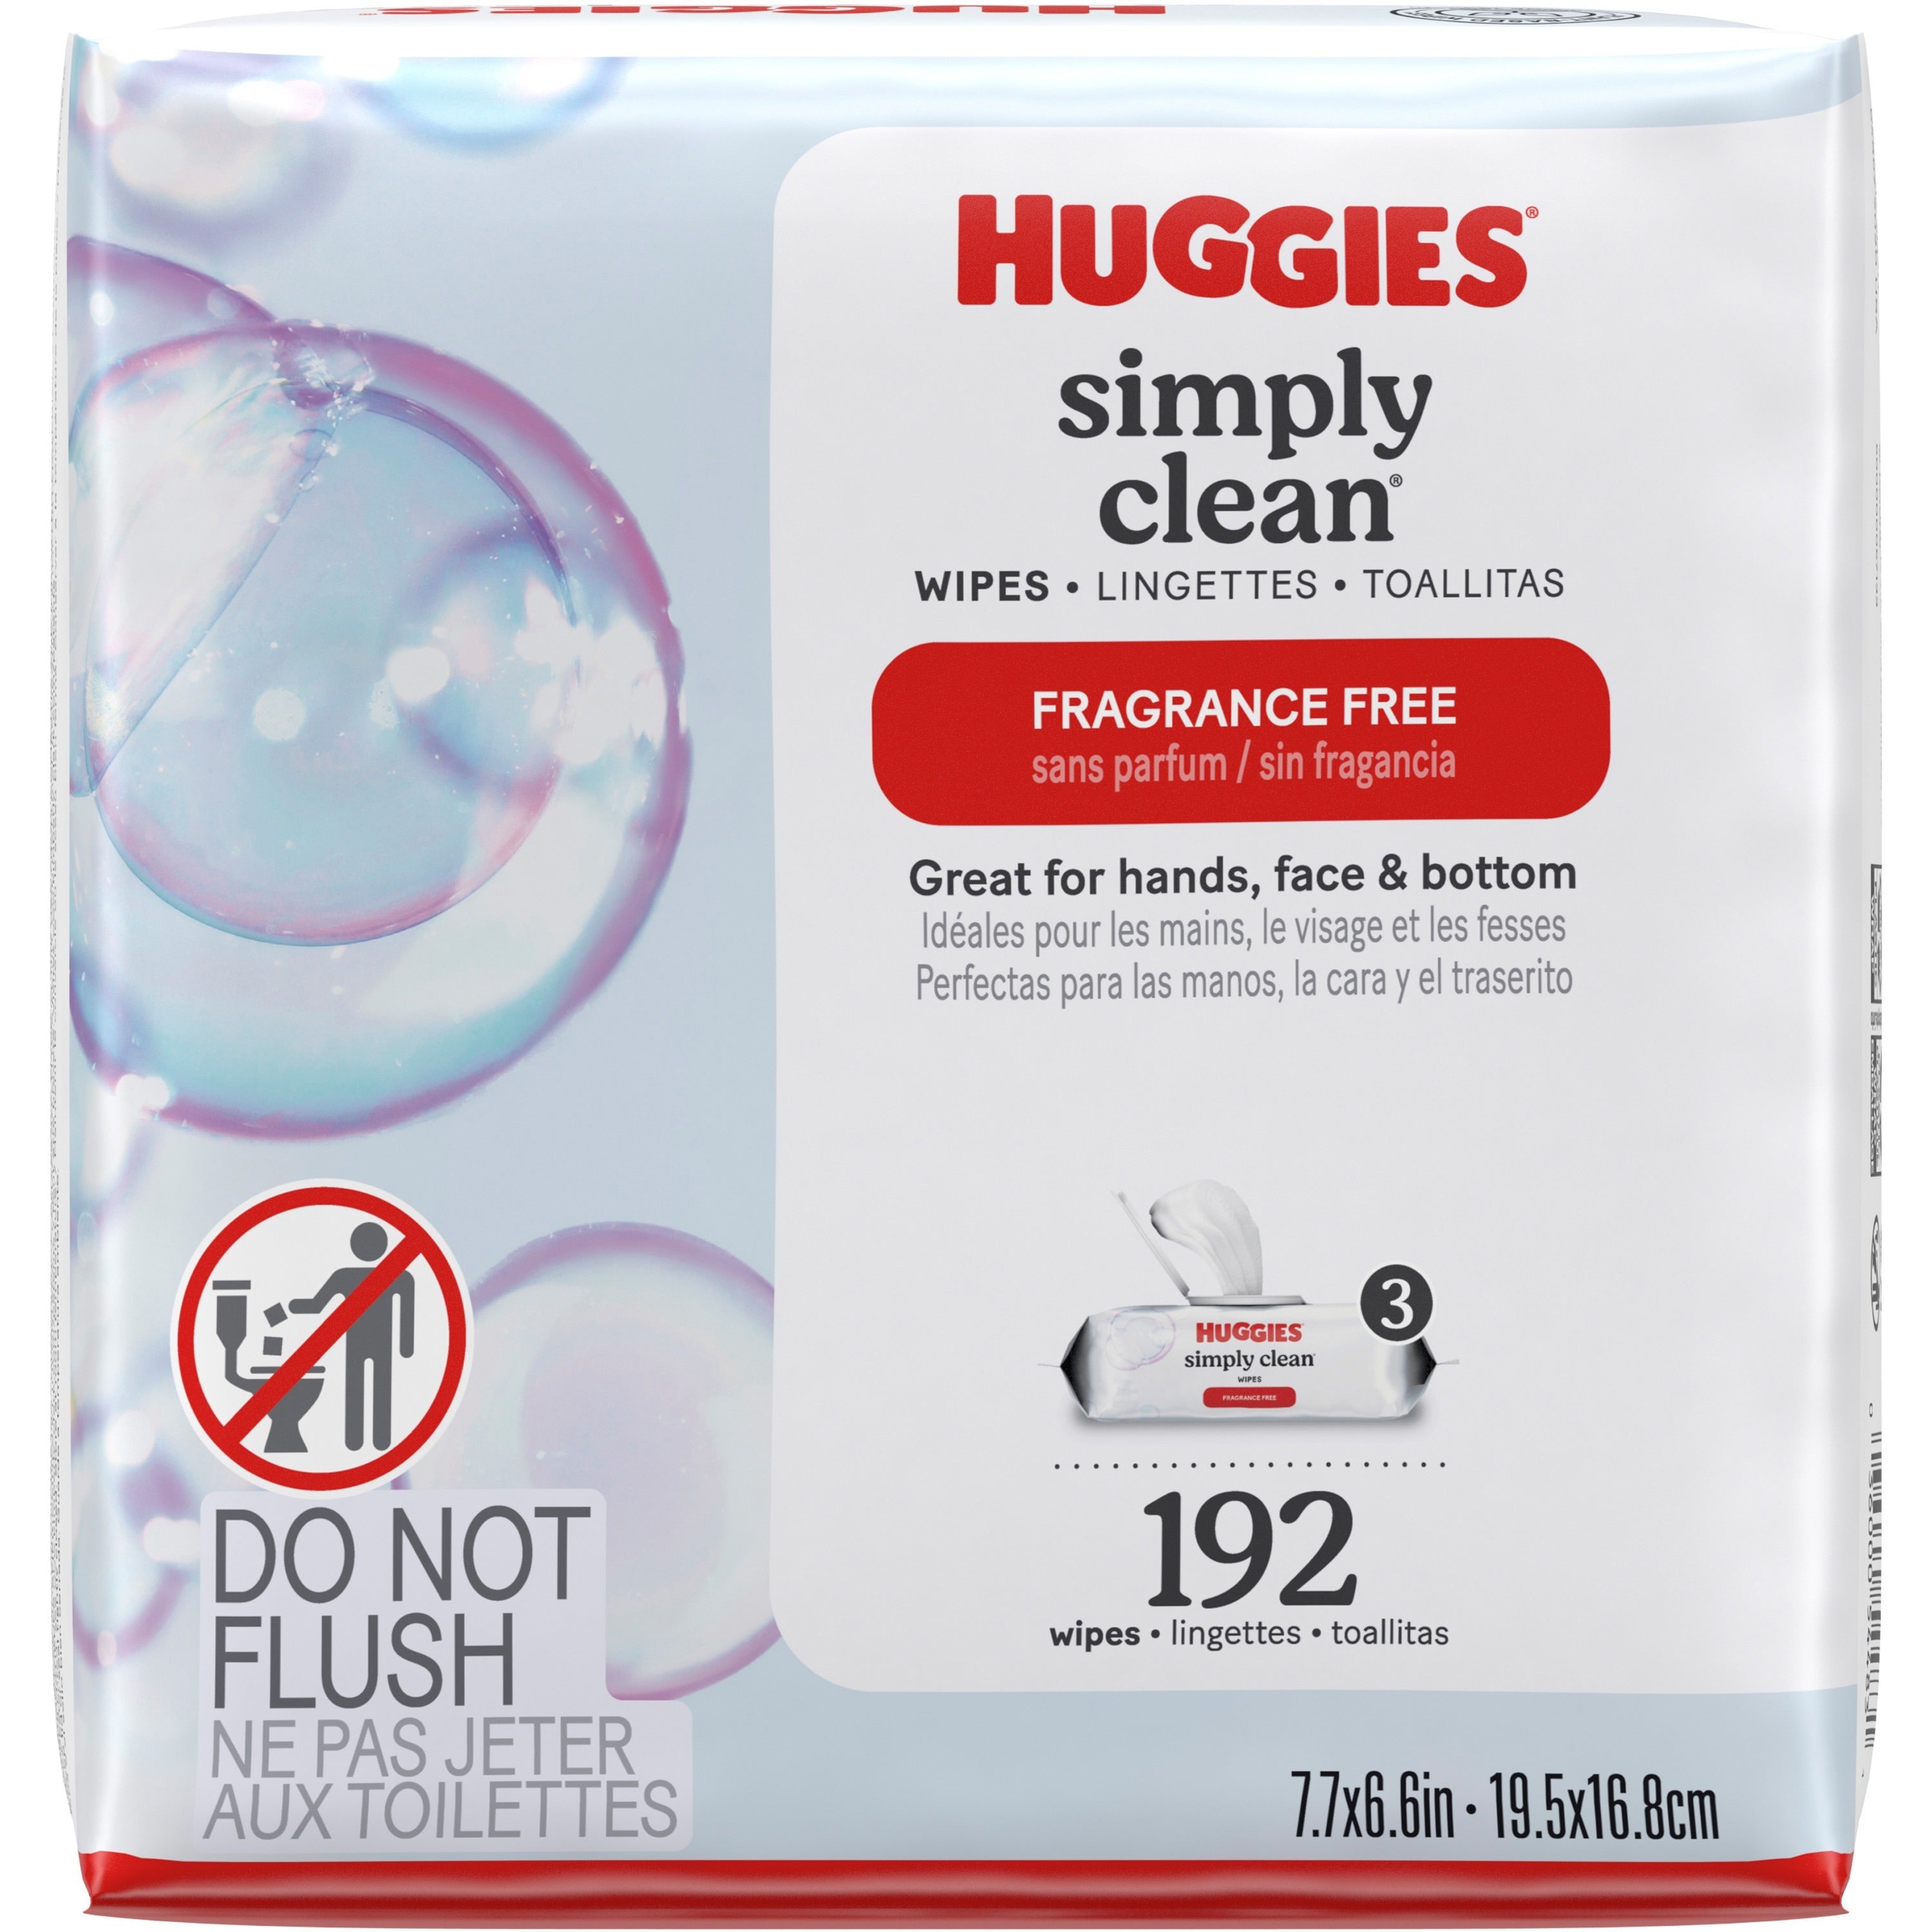 huggies-simply-clean-wipes-white-unscented-hypoallergenic-ph-balanced-fragrance-free-alcohol-free-paraben-free-phenoxyethanol-free-for-hand-skin-face-1-each_kcc54483 - 3